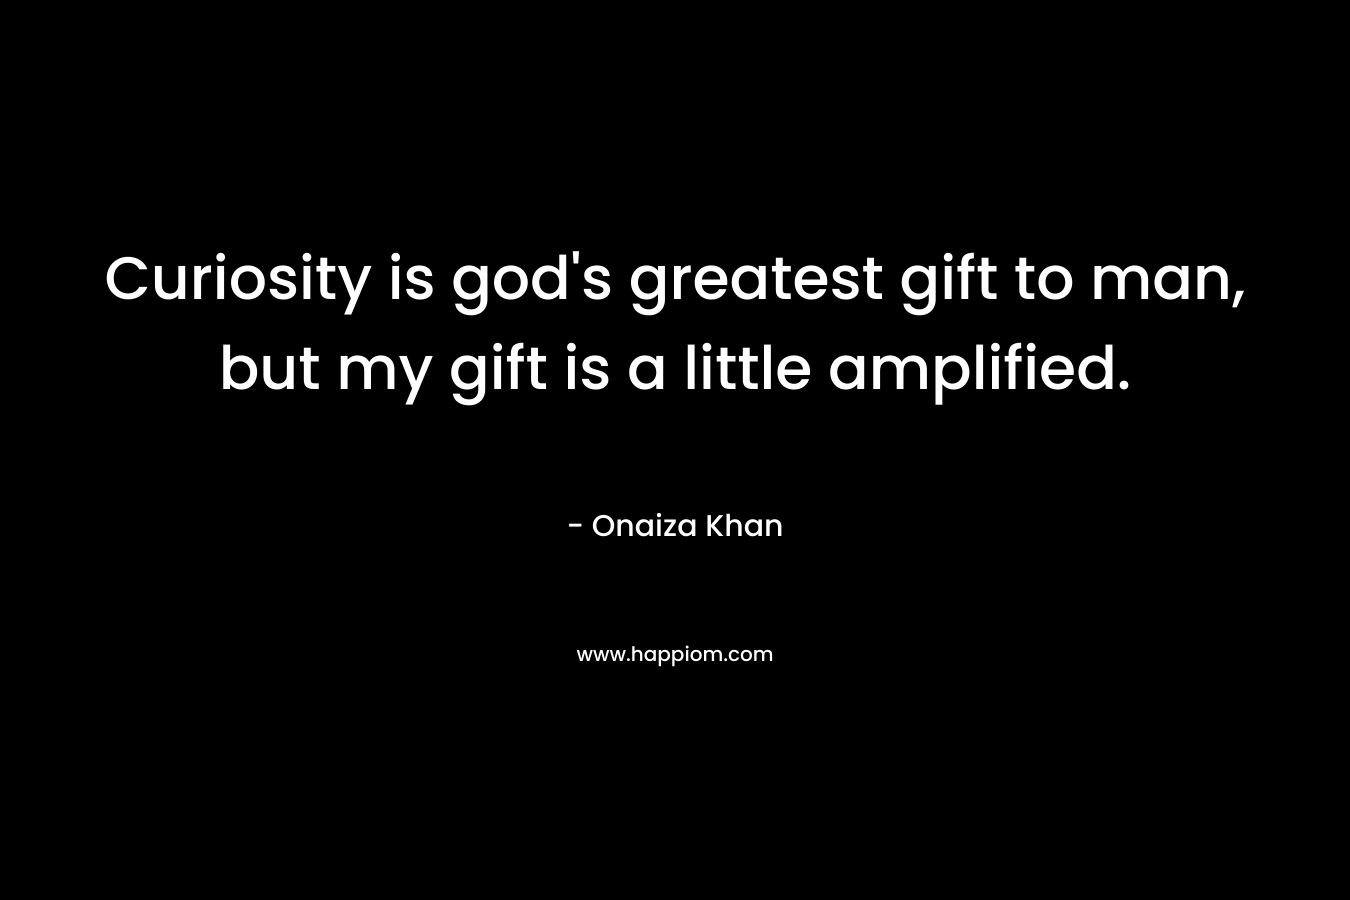 Curiosity is god's greatest gift to man, but my gift is a little amplified.